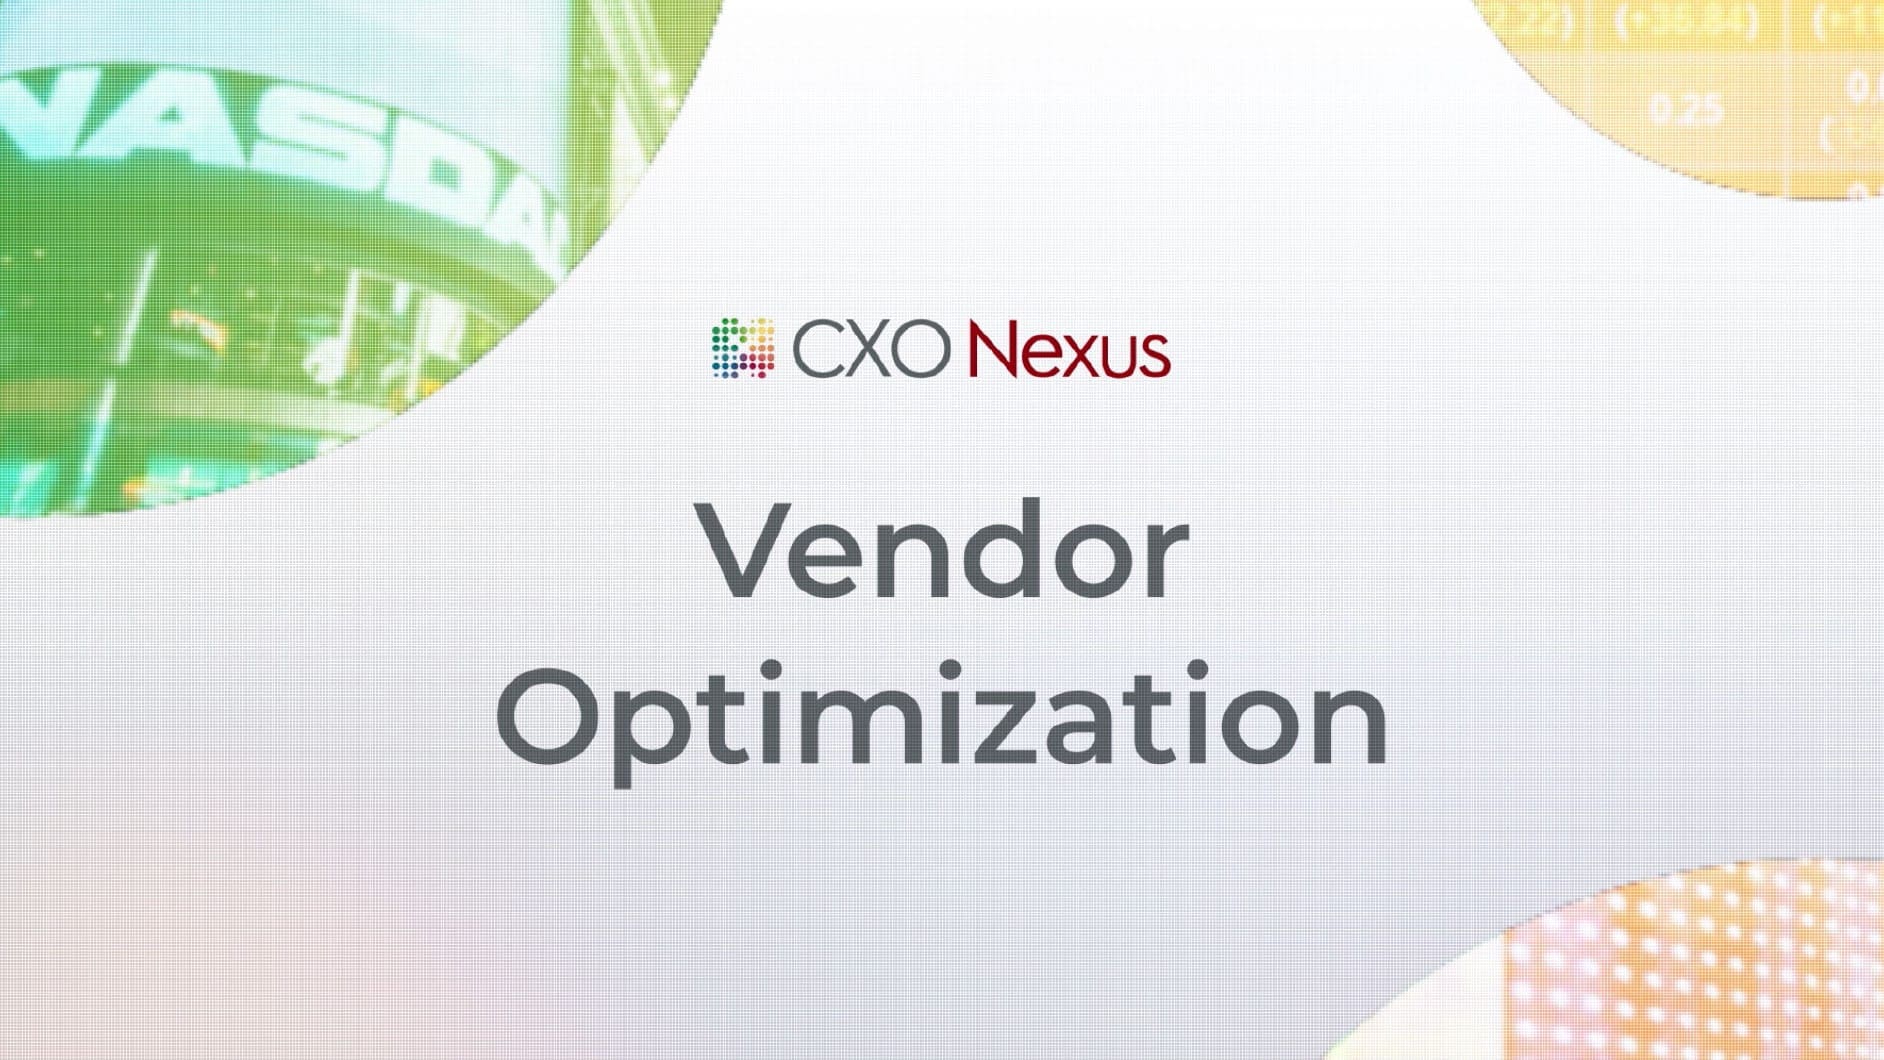 Vendor optimization segment of conversation with Insider Intelligence and Nasdaq about using new technologies to clean and normalize vendor data. Using CXO Nexus to Reveal Spend InCights for Global Enterprise.